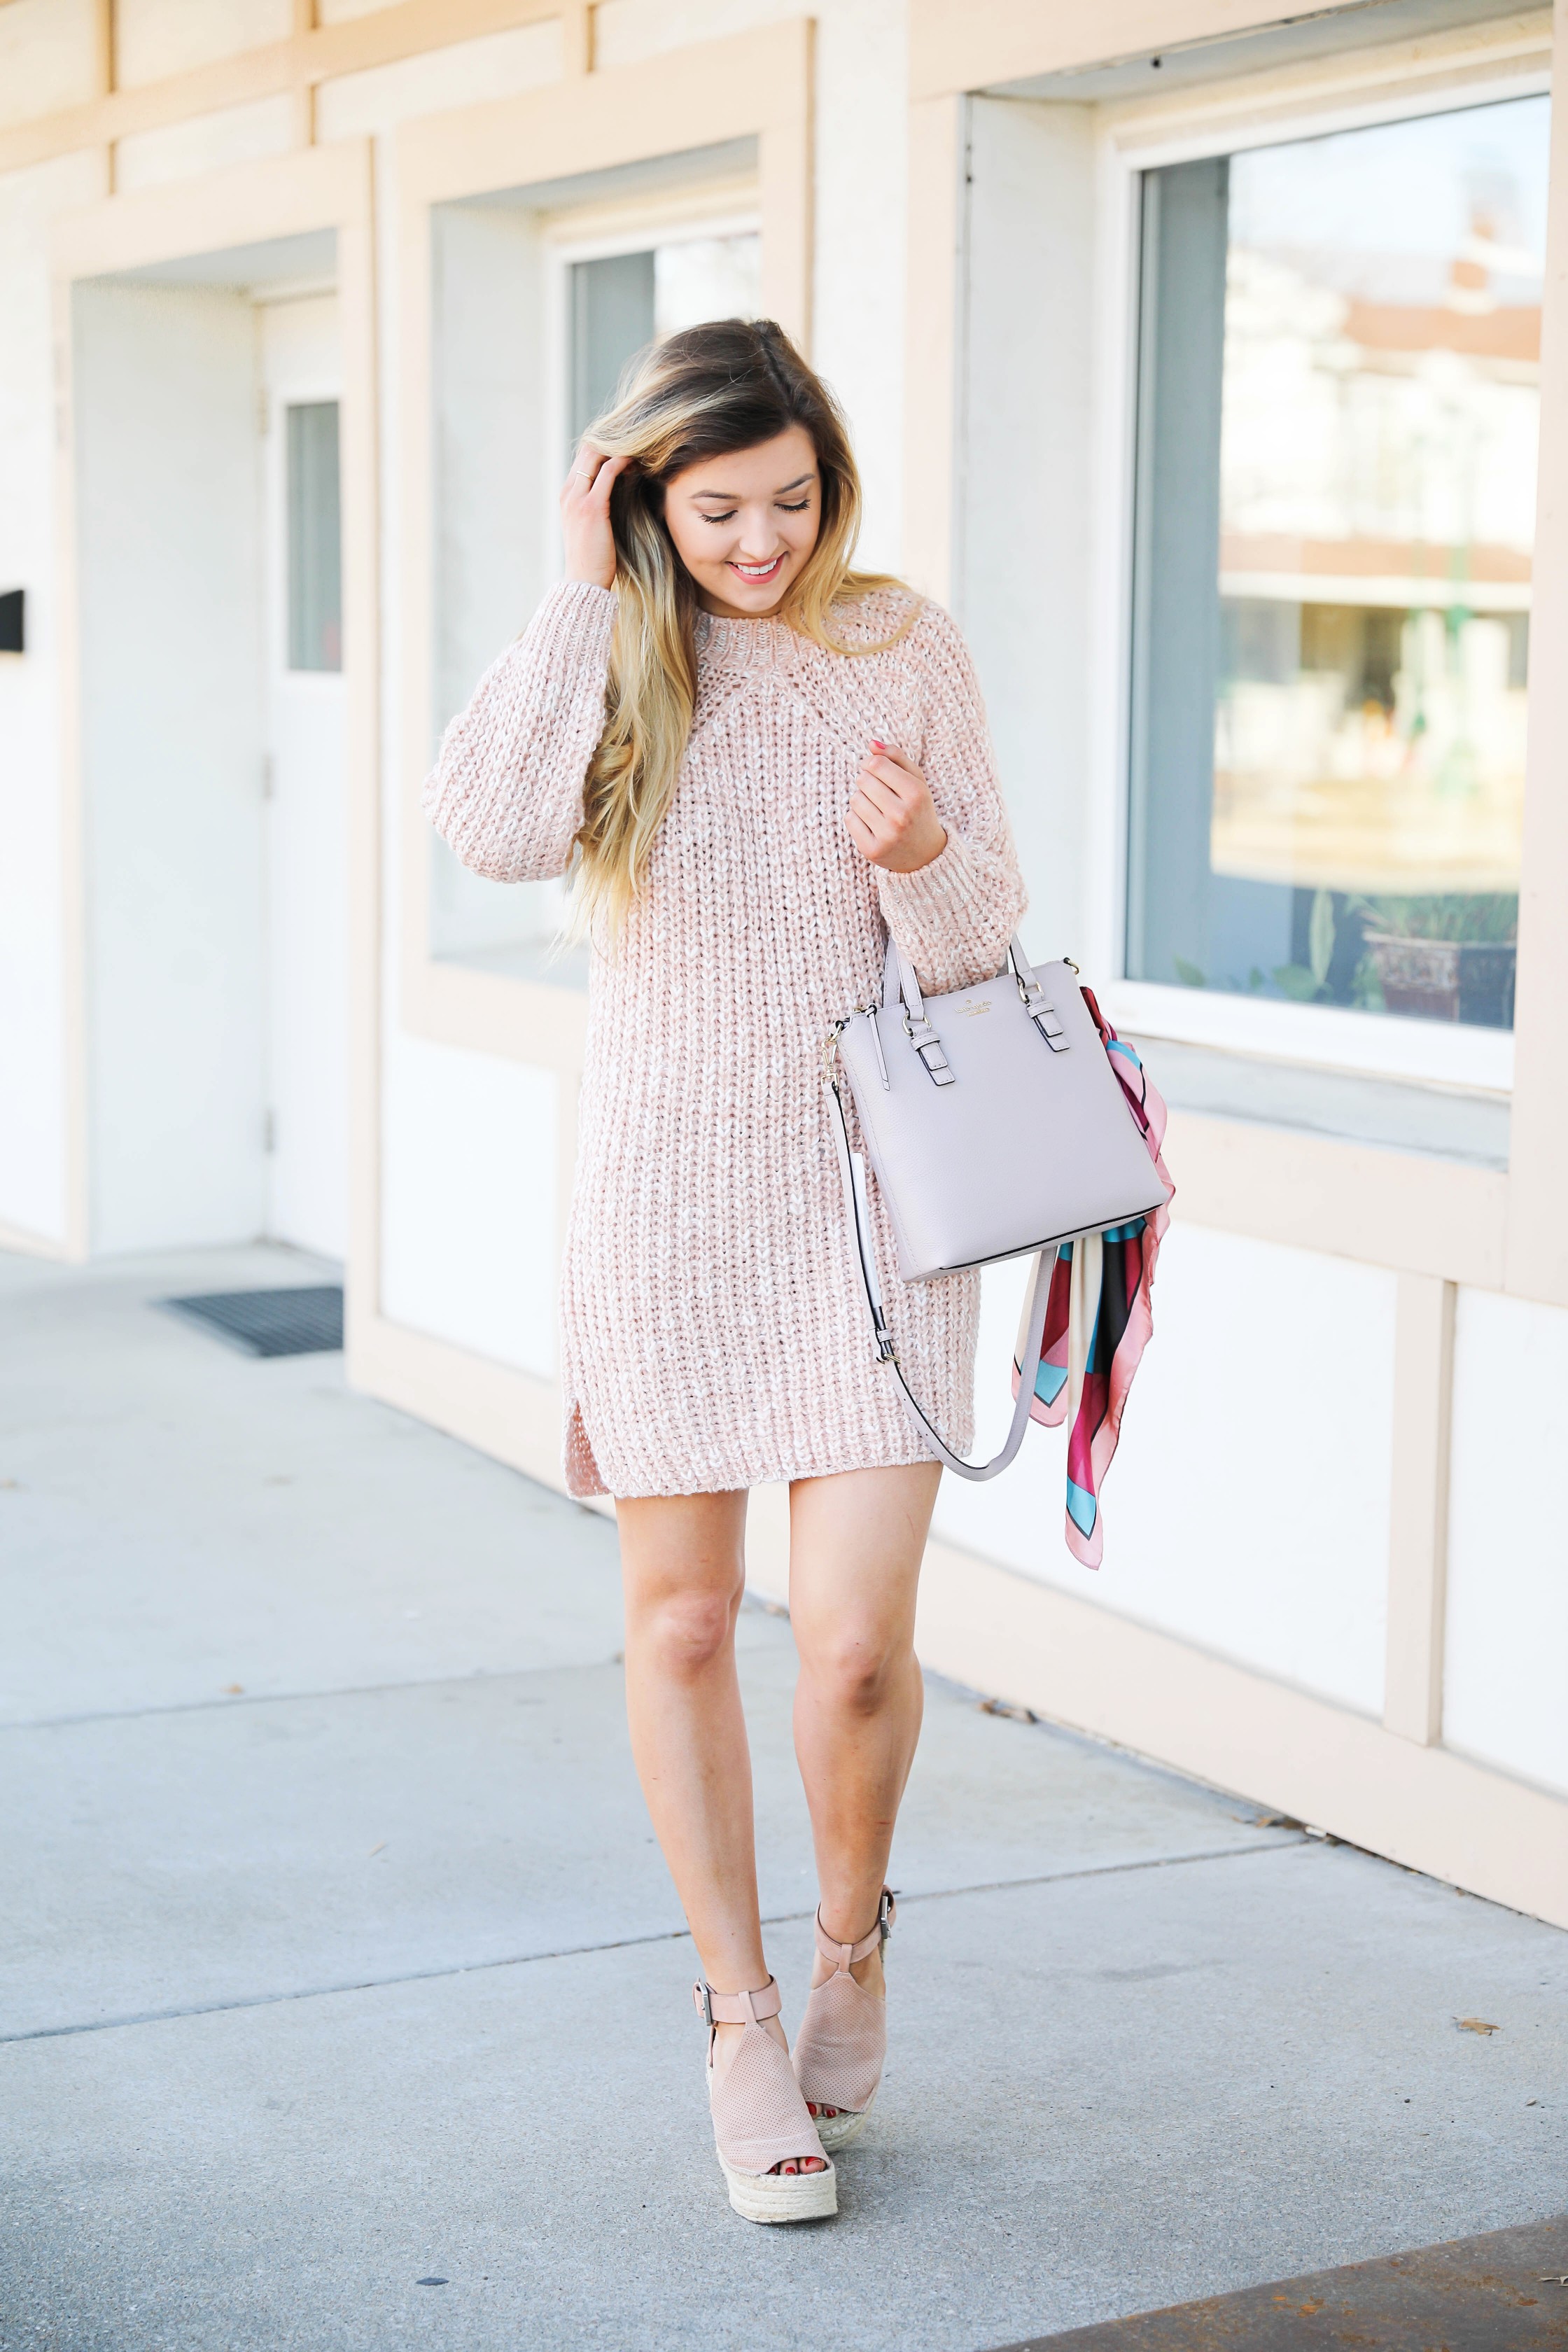 Pink sweater dress with kate spade bag! I love this Kate Spade bag with the pink scarf tied on it! It really adds some cute feminine flair! My new favorite purse! Details on fashion blog daily dose of charm by lauren lindmark